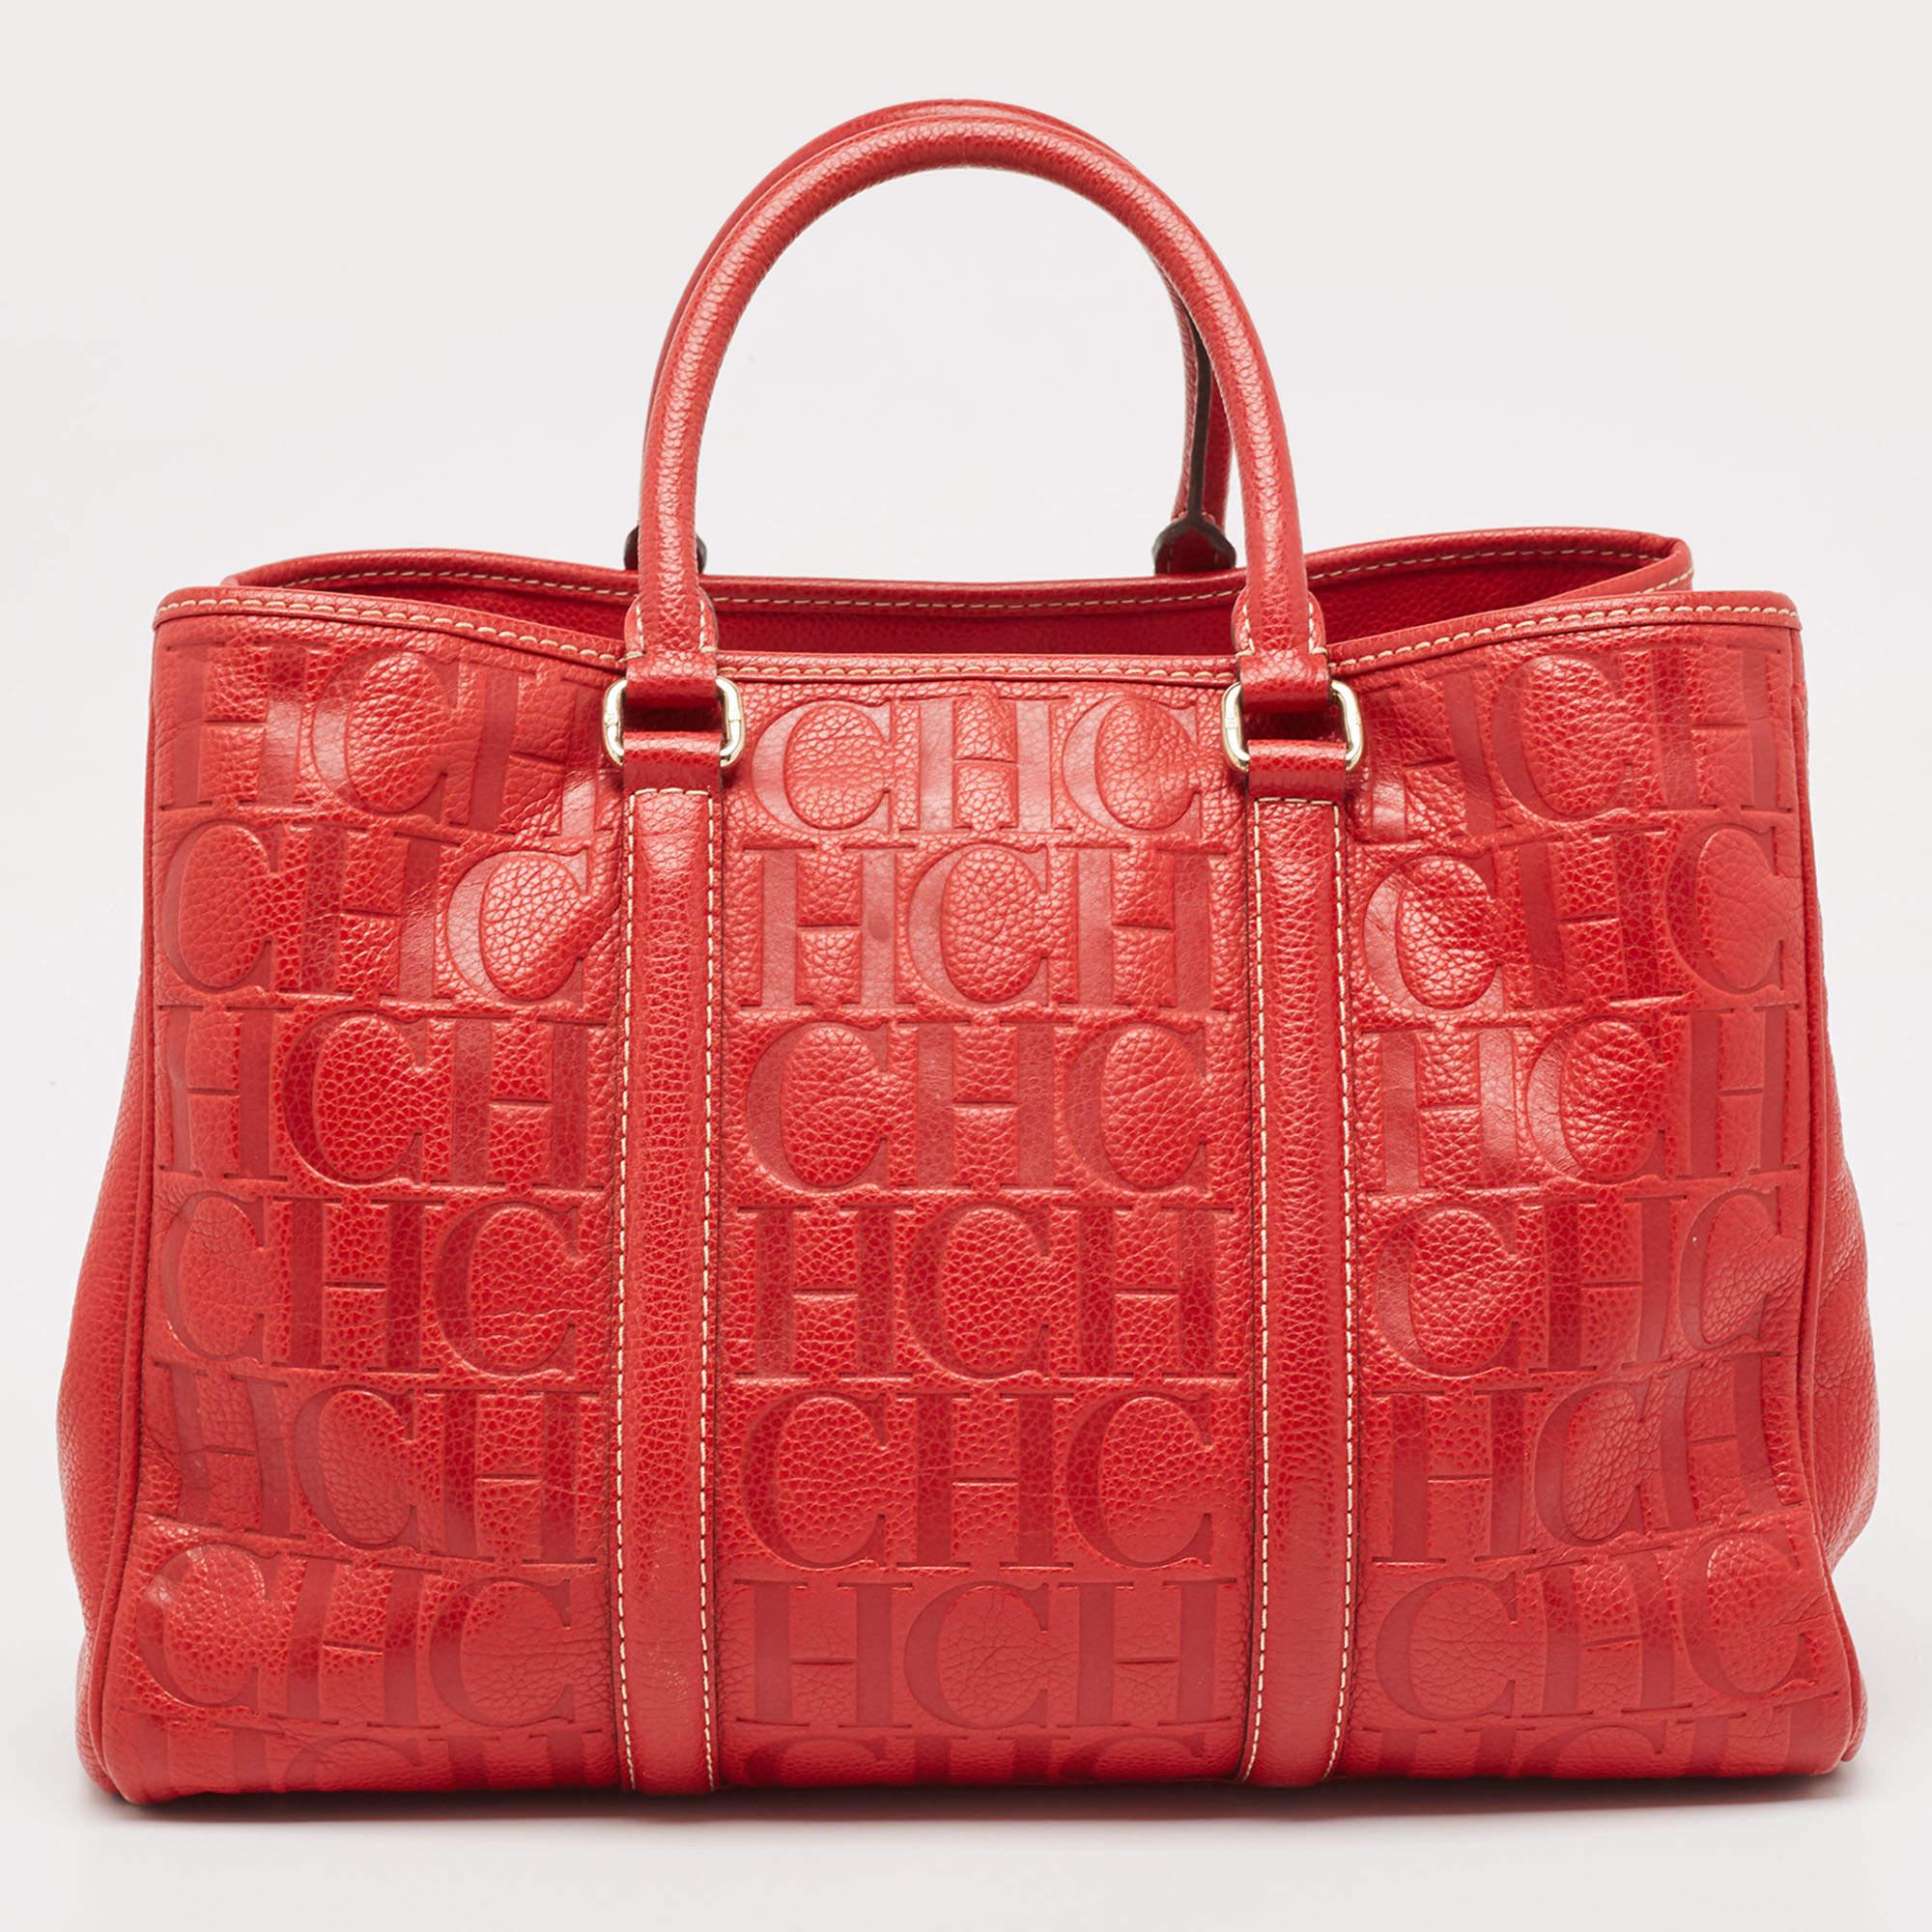 This Matteo tote from Carolina Herrera is an all-time favorite. It is made from monogram embossed leather and comes in a lovely red shade.

